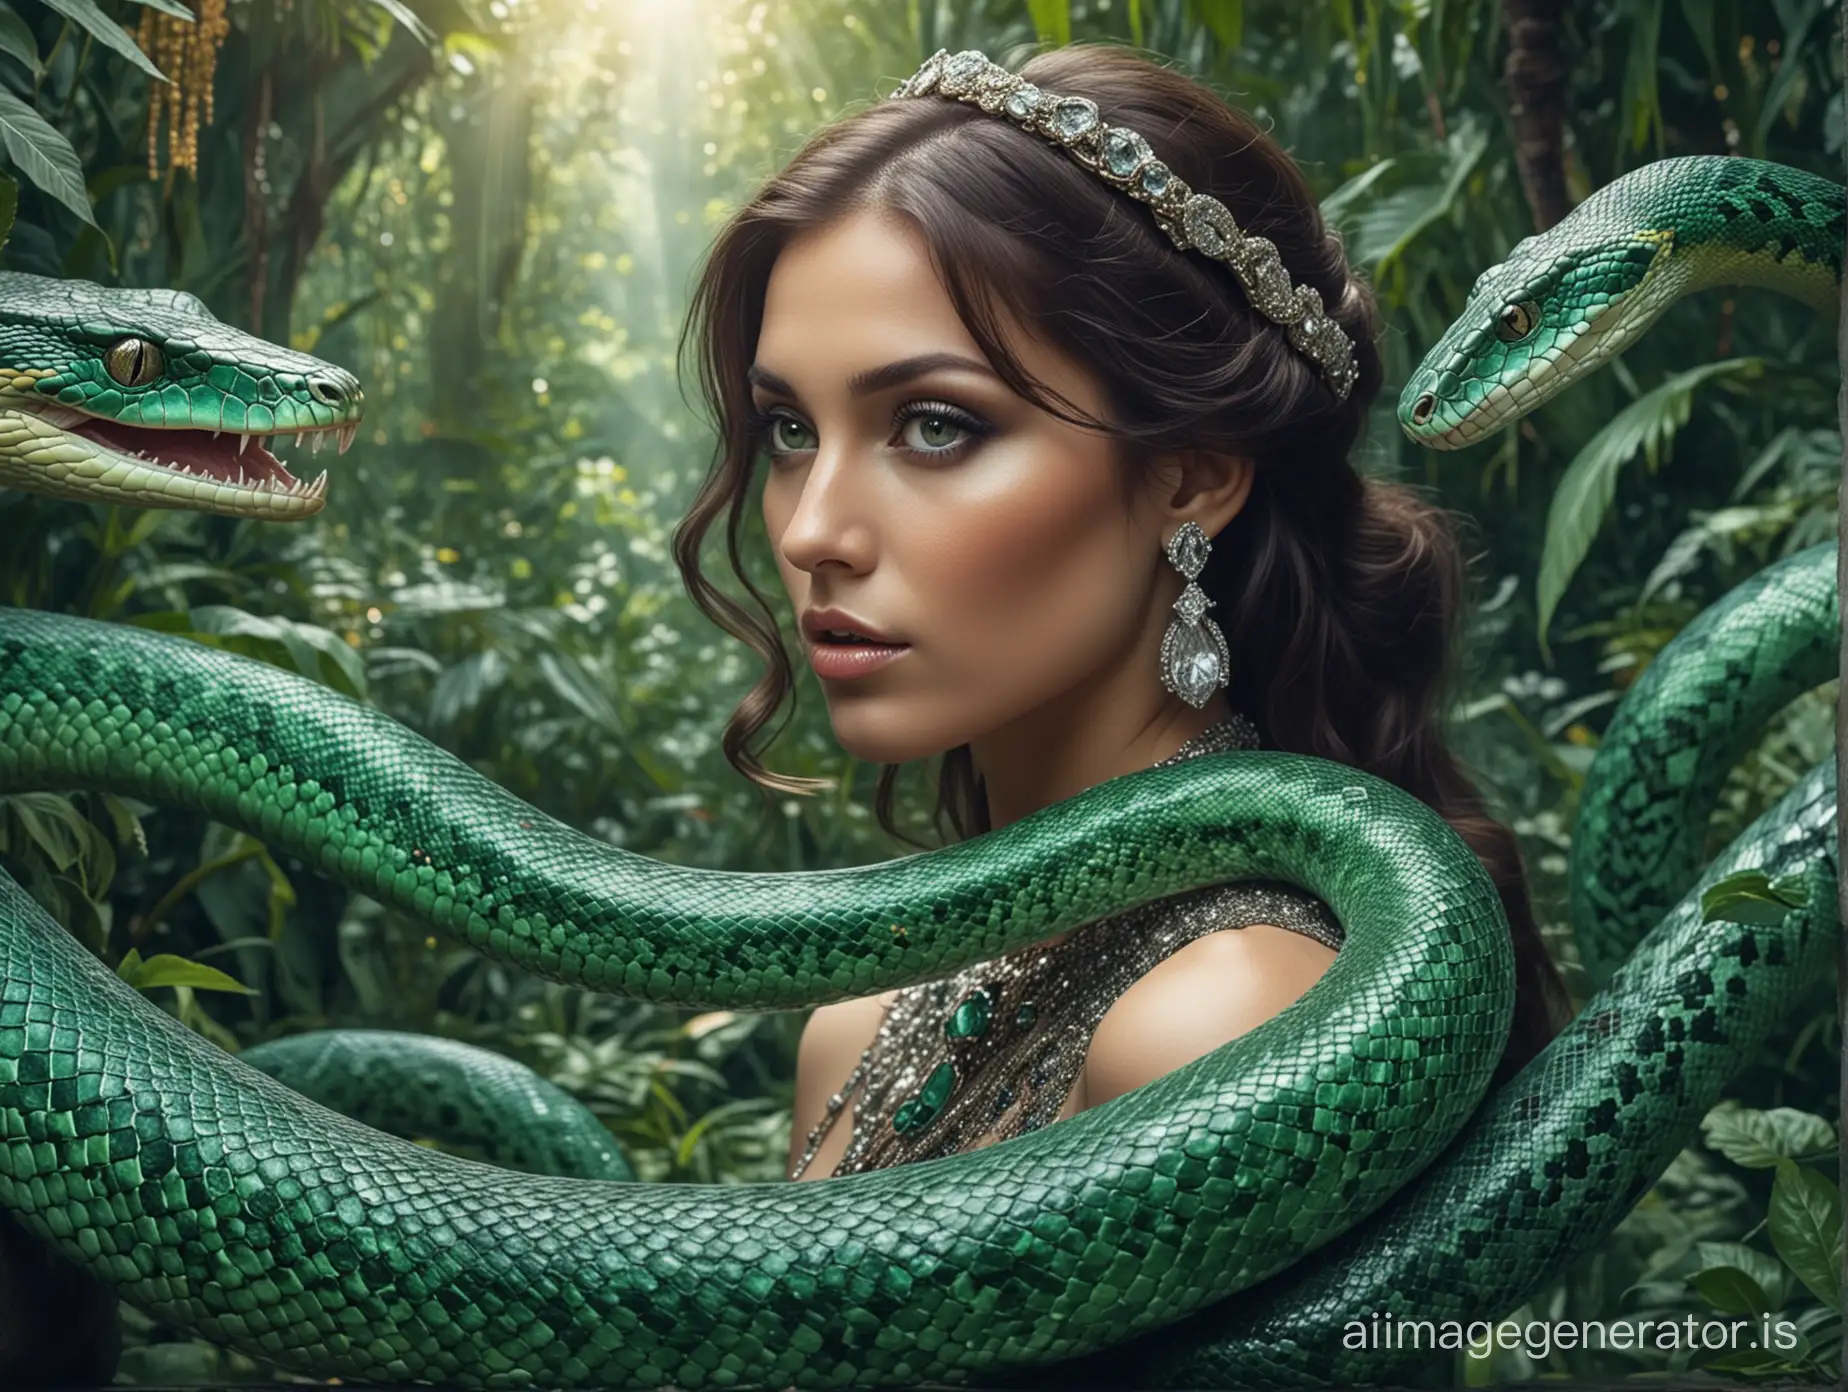 Enigmatic-Encounter-Woman-and-Giant-Emerald-Snake-in-a-Sparkling-Fantasy